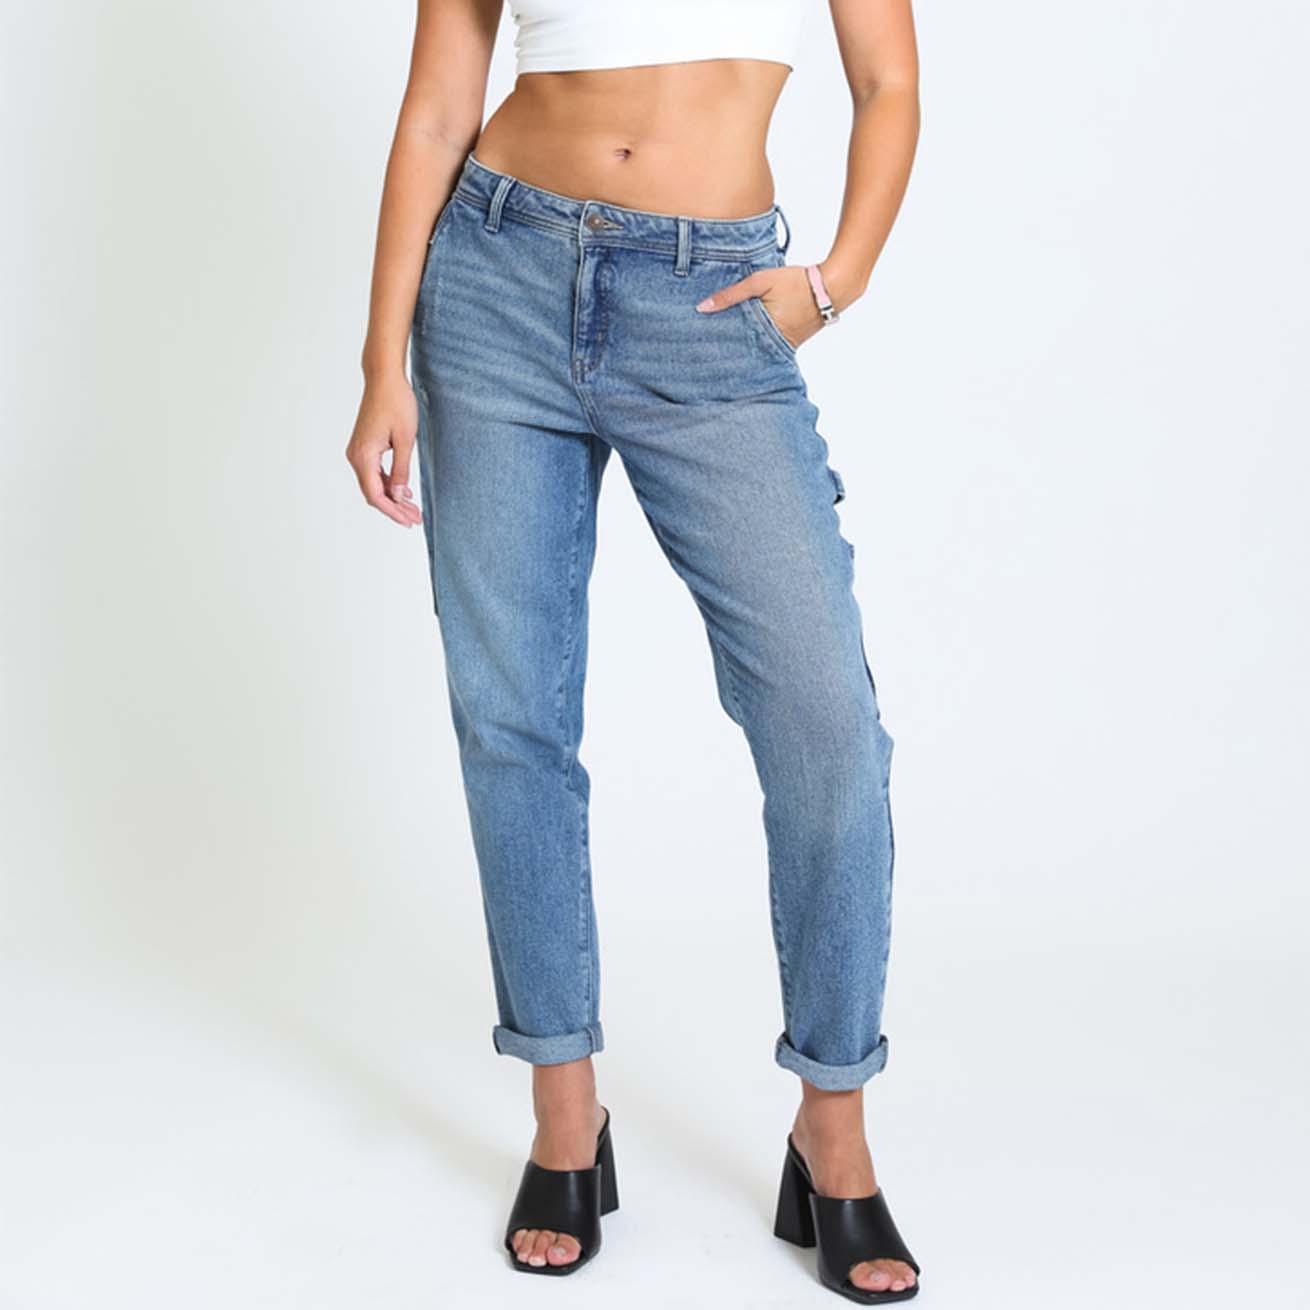 Buy Reelize - Denim Jeans for Women High Waist - Normal Size - 3 Button  High Waist - Skin Fit, Ankle Length - Ideal for Party/Office/Casual Wear -  Light Blue - Size 28 - (T50004-28) at